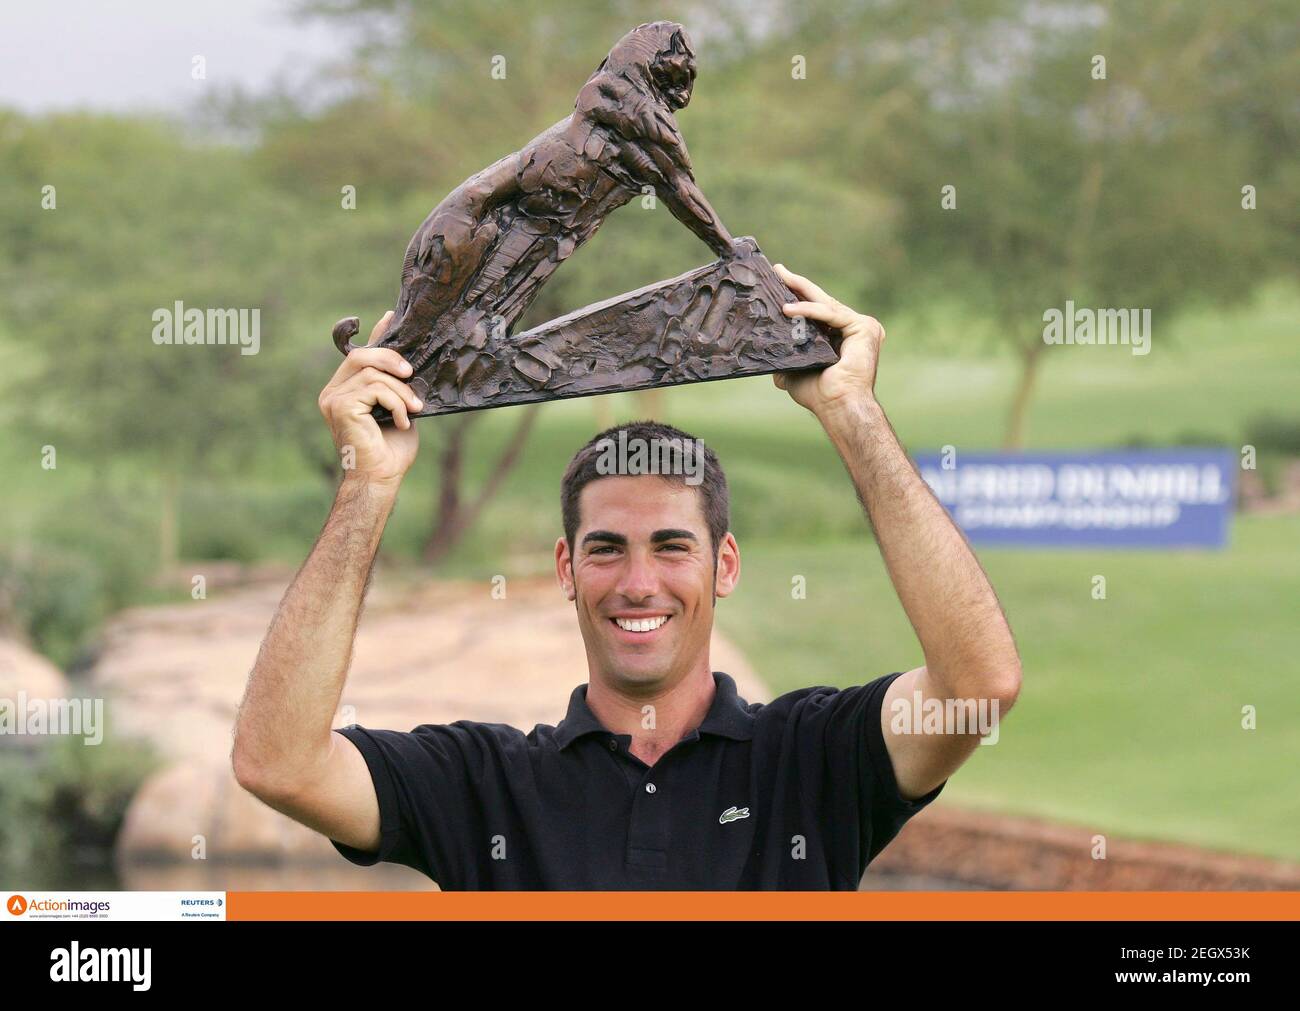 Golf - Alfred Dunhill Championship - Leopard Creek, Mpumalanga, South Africa  - 10/12/06 Alvaro Quiros of Spain